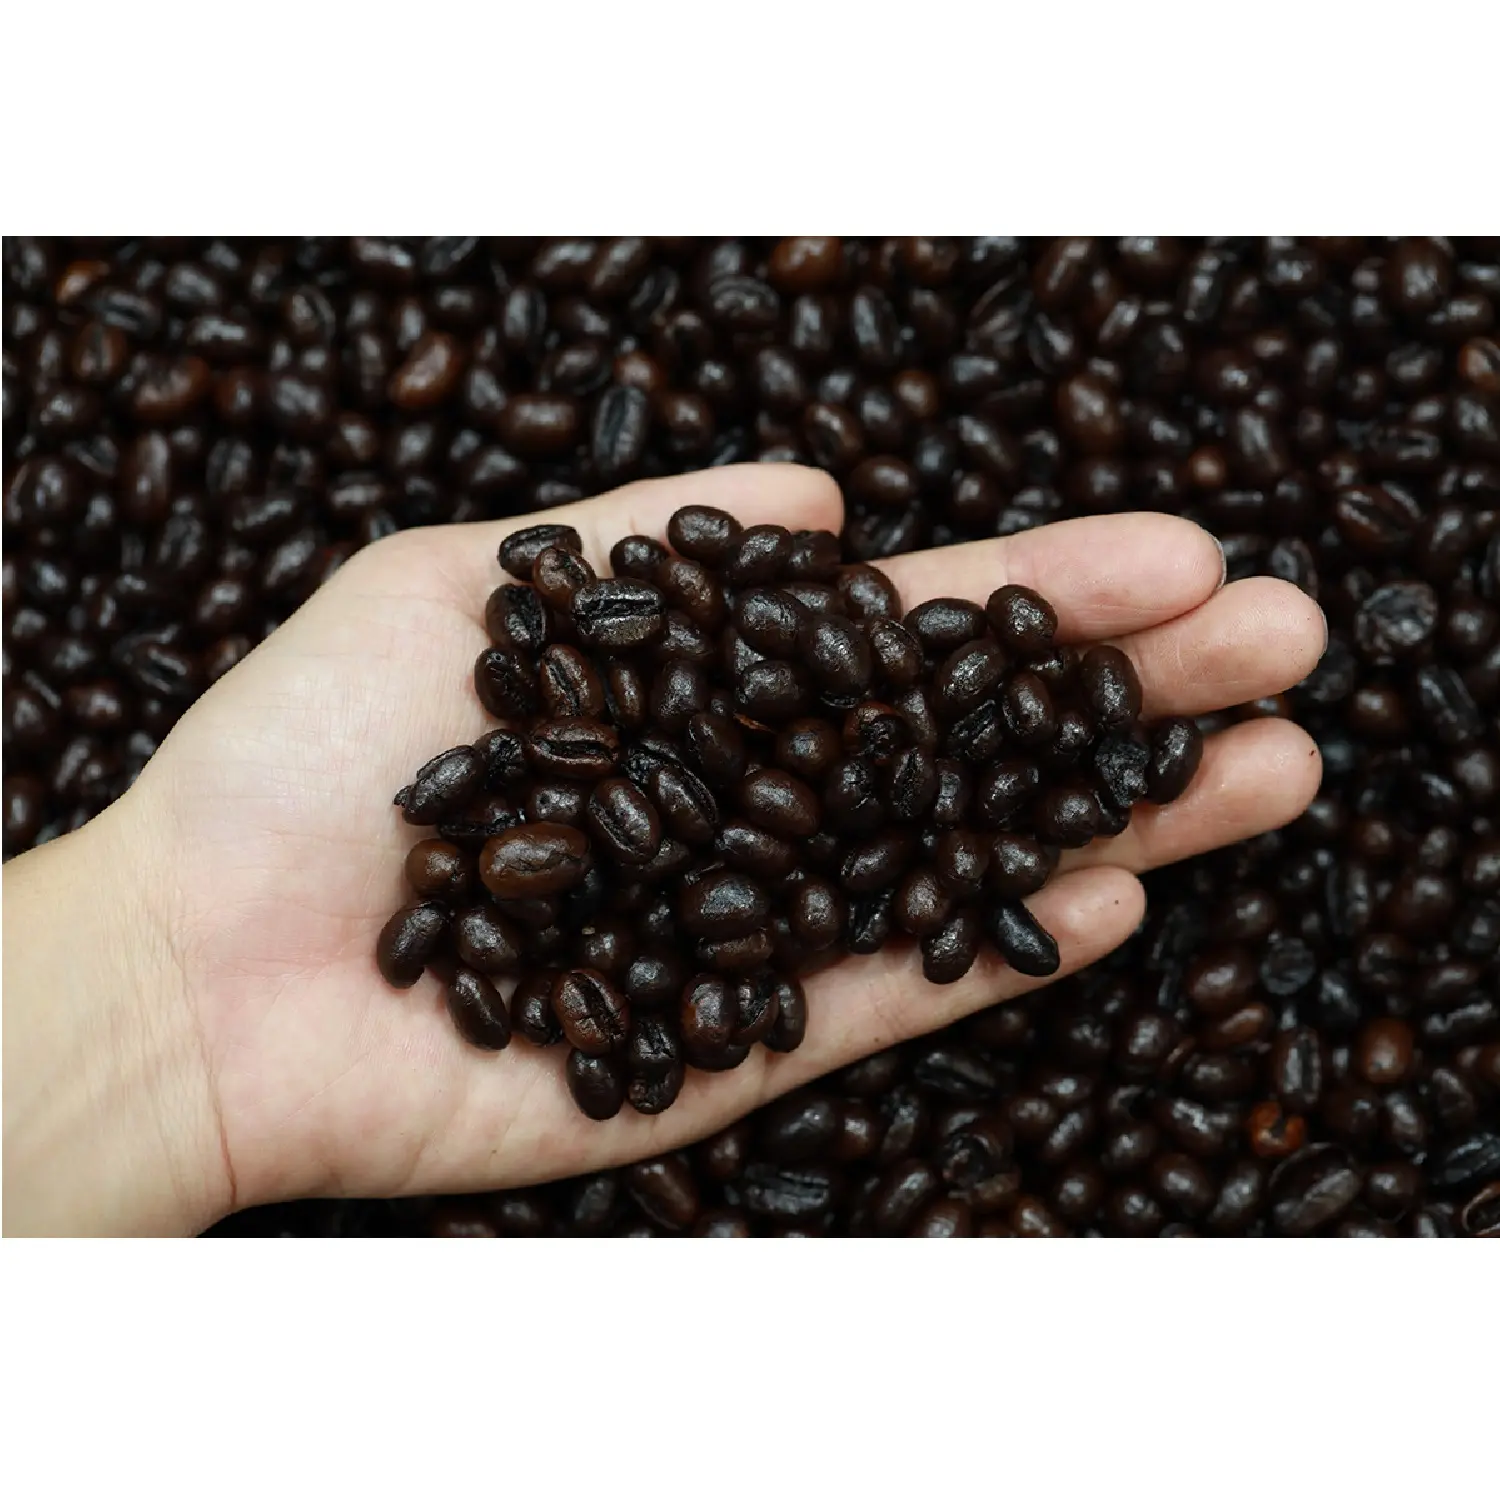 Shipping Worldwide Bulk Packaging Brown Culi Roasted Coffee Beans Additional Butter Lodized Salt Ingredient